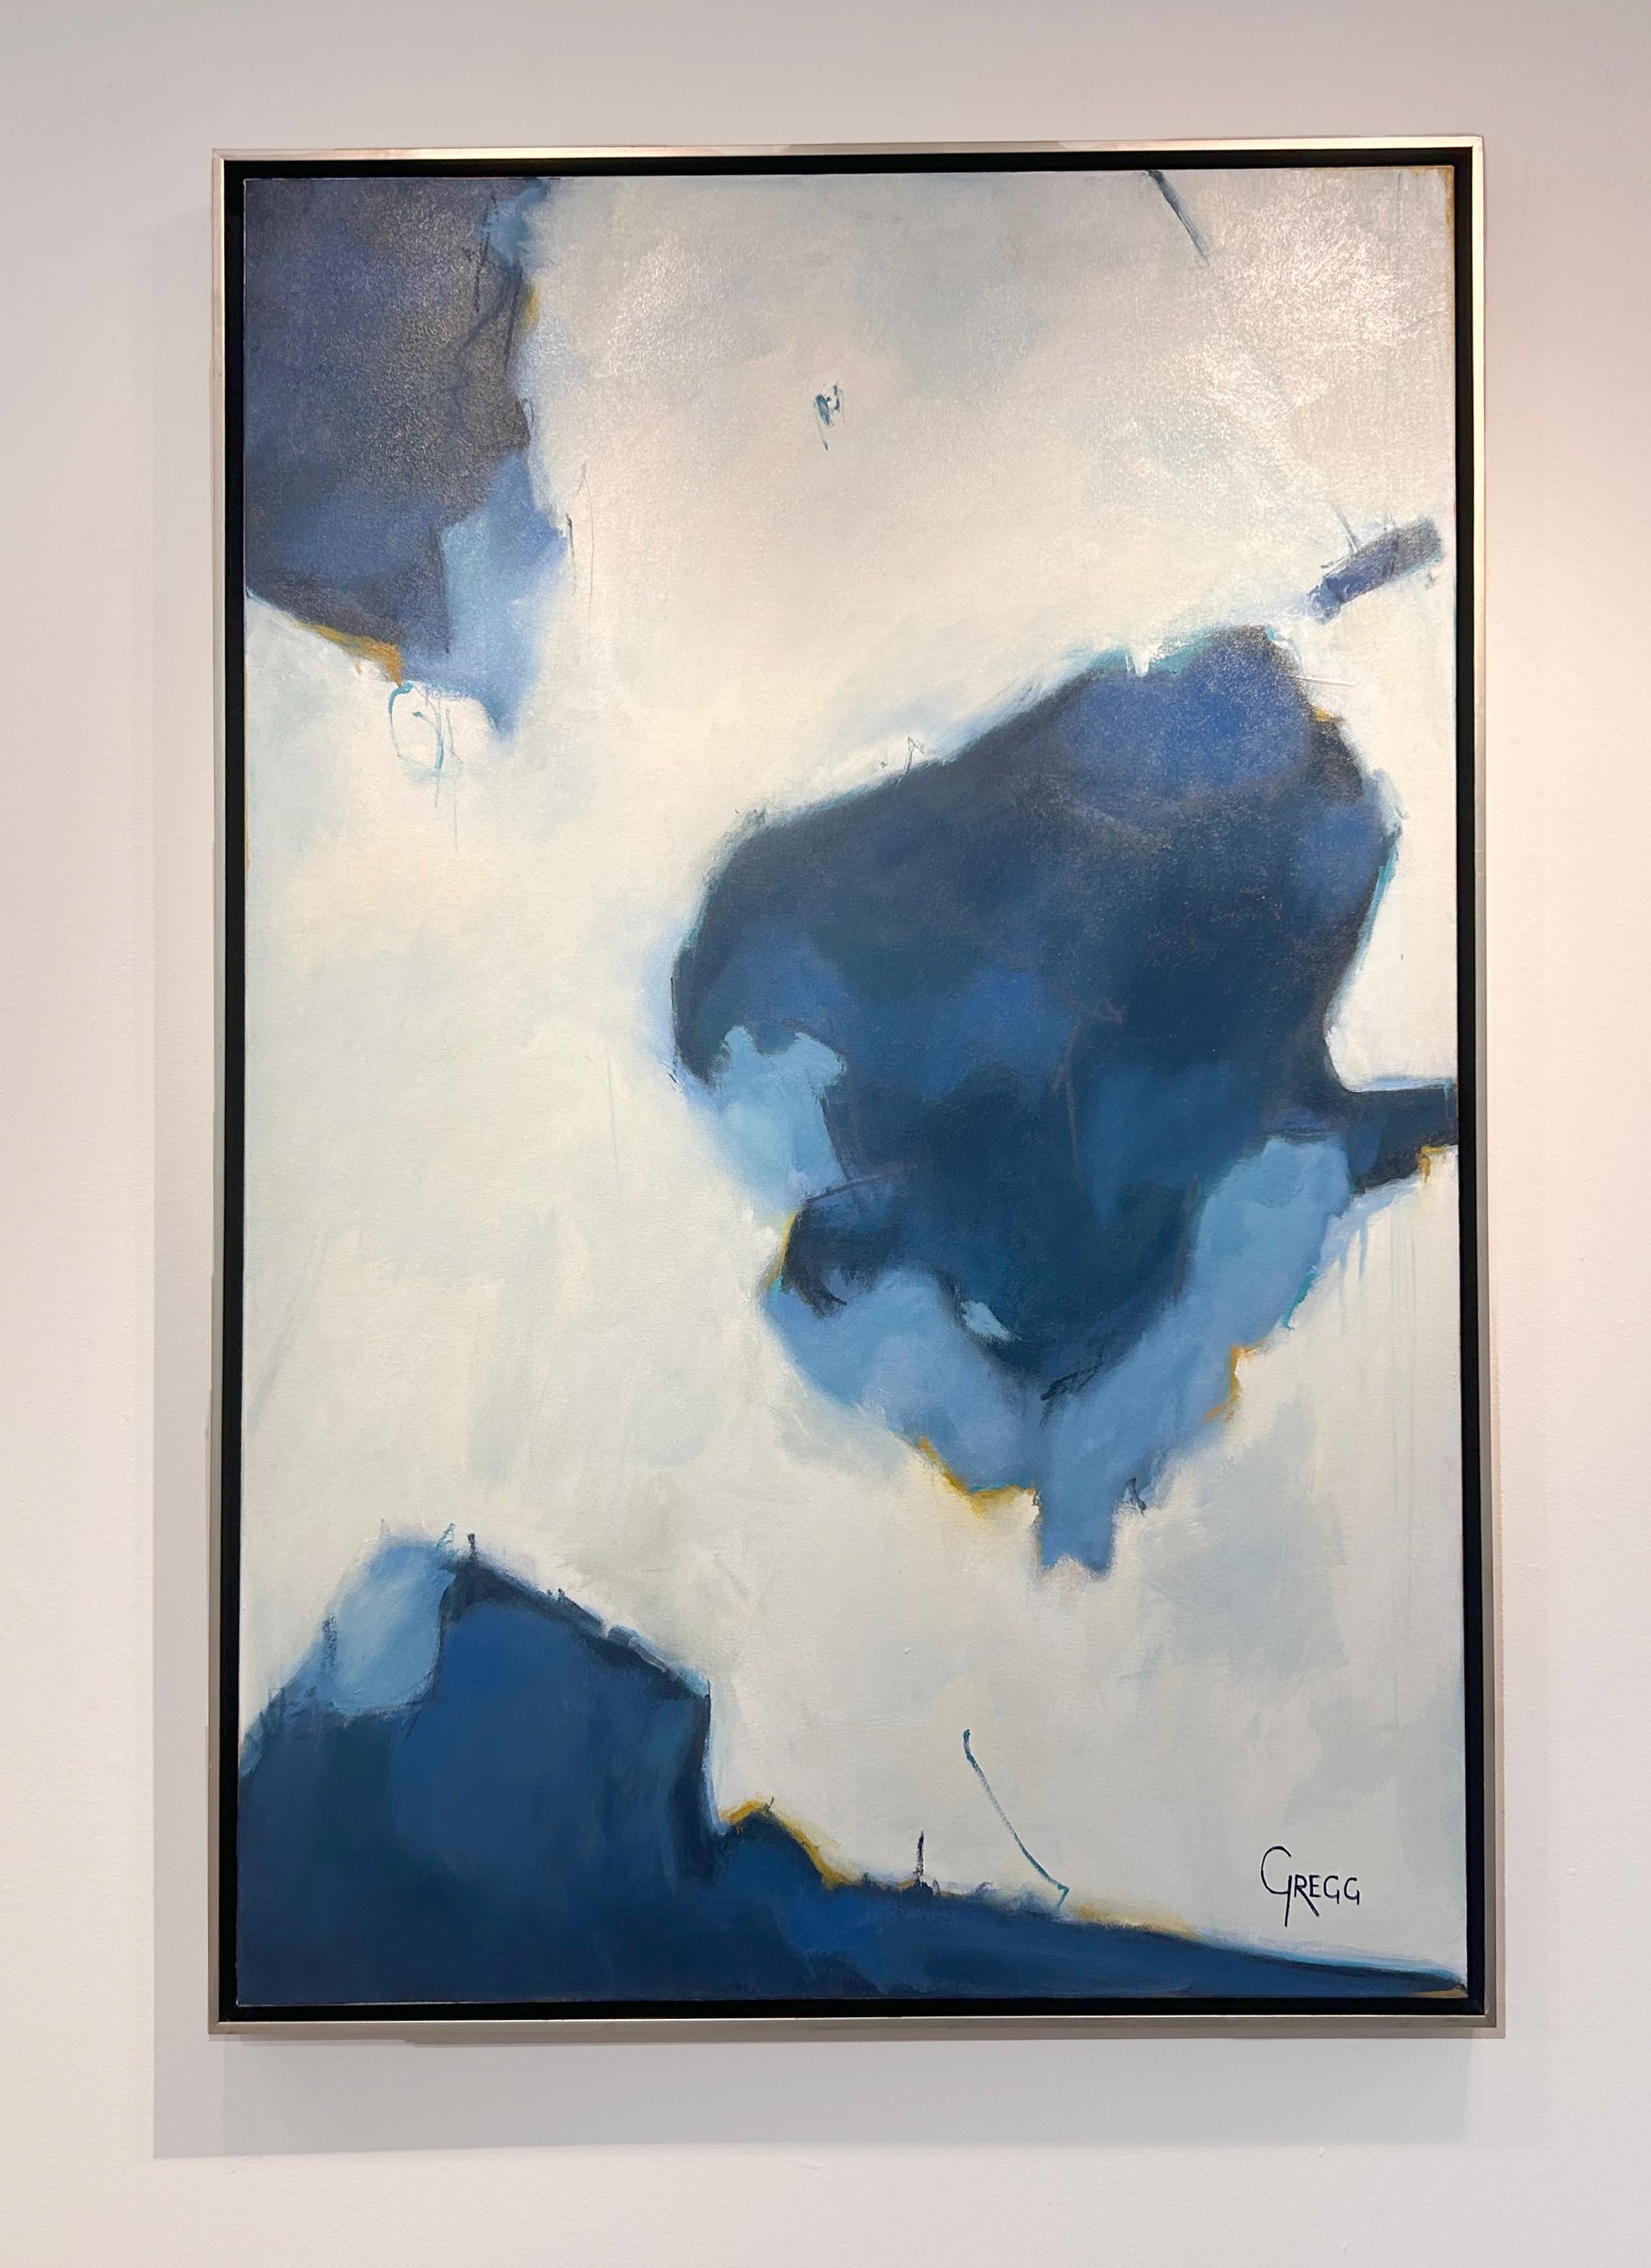 This abstract painting, 